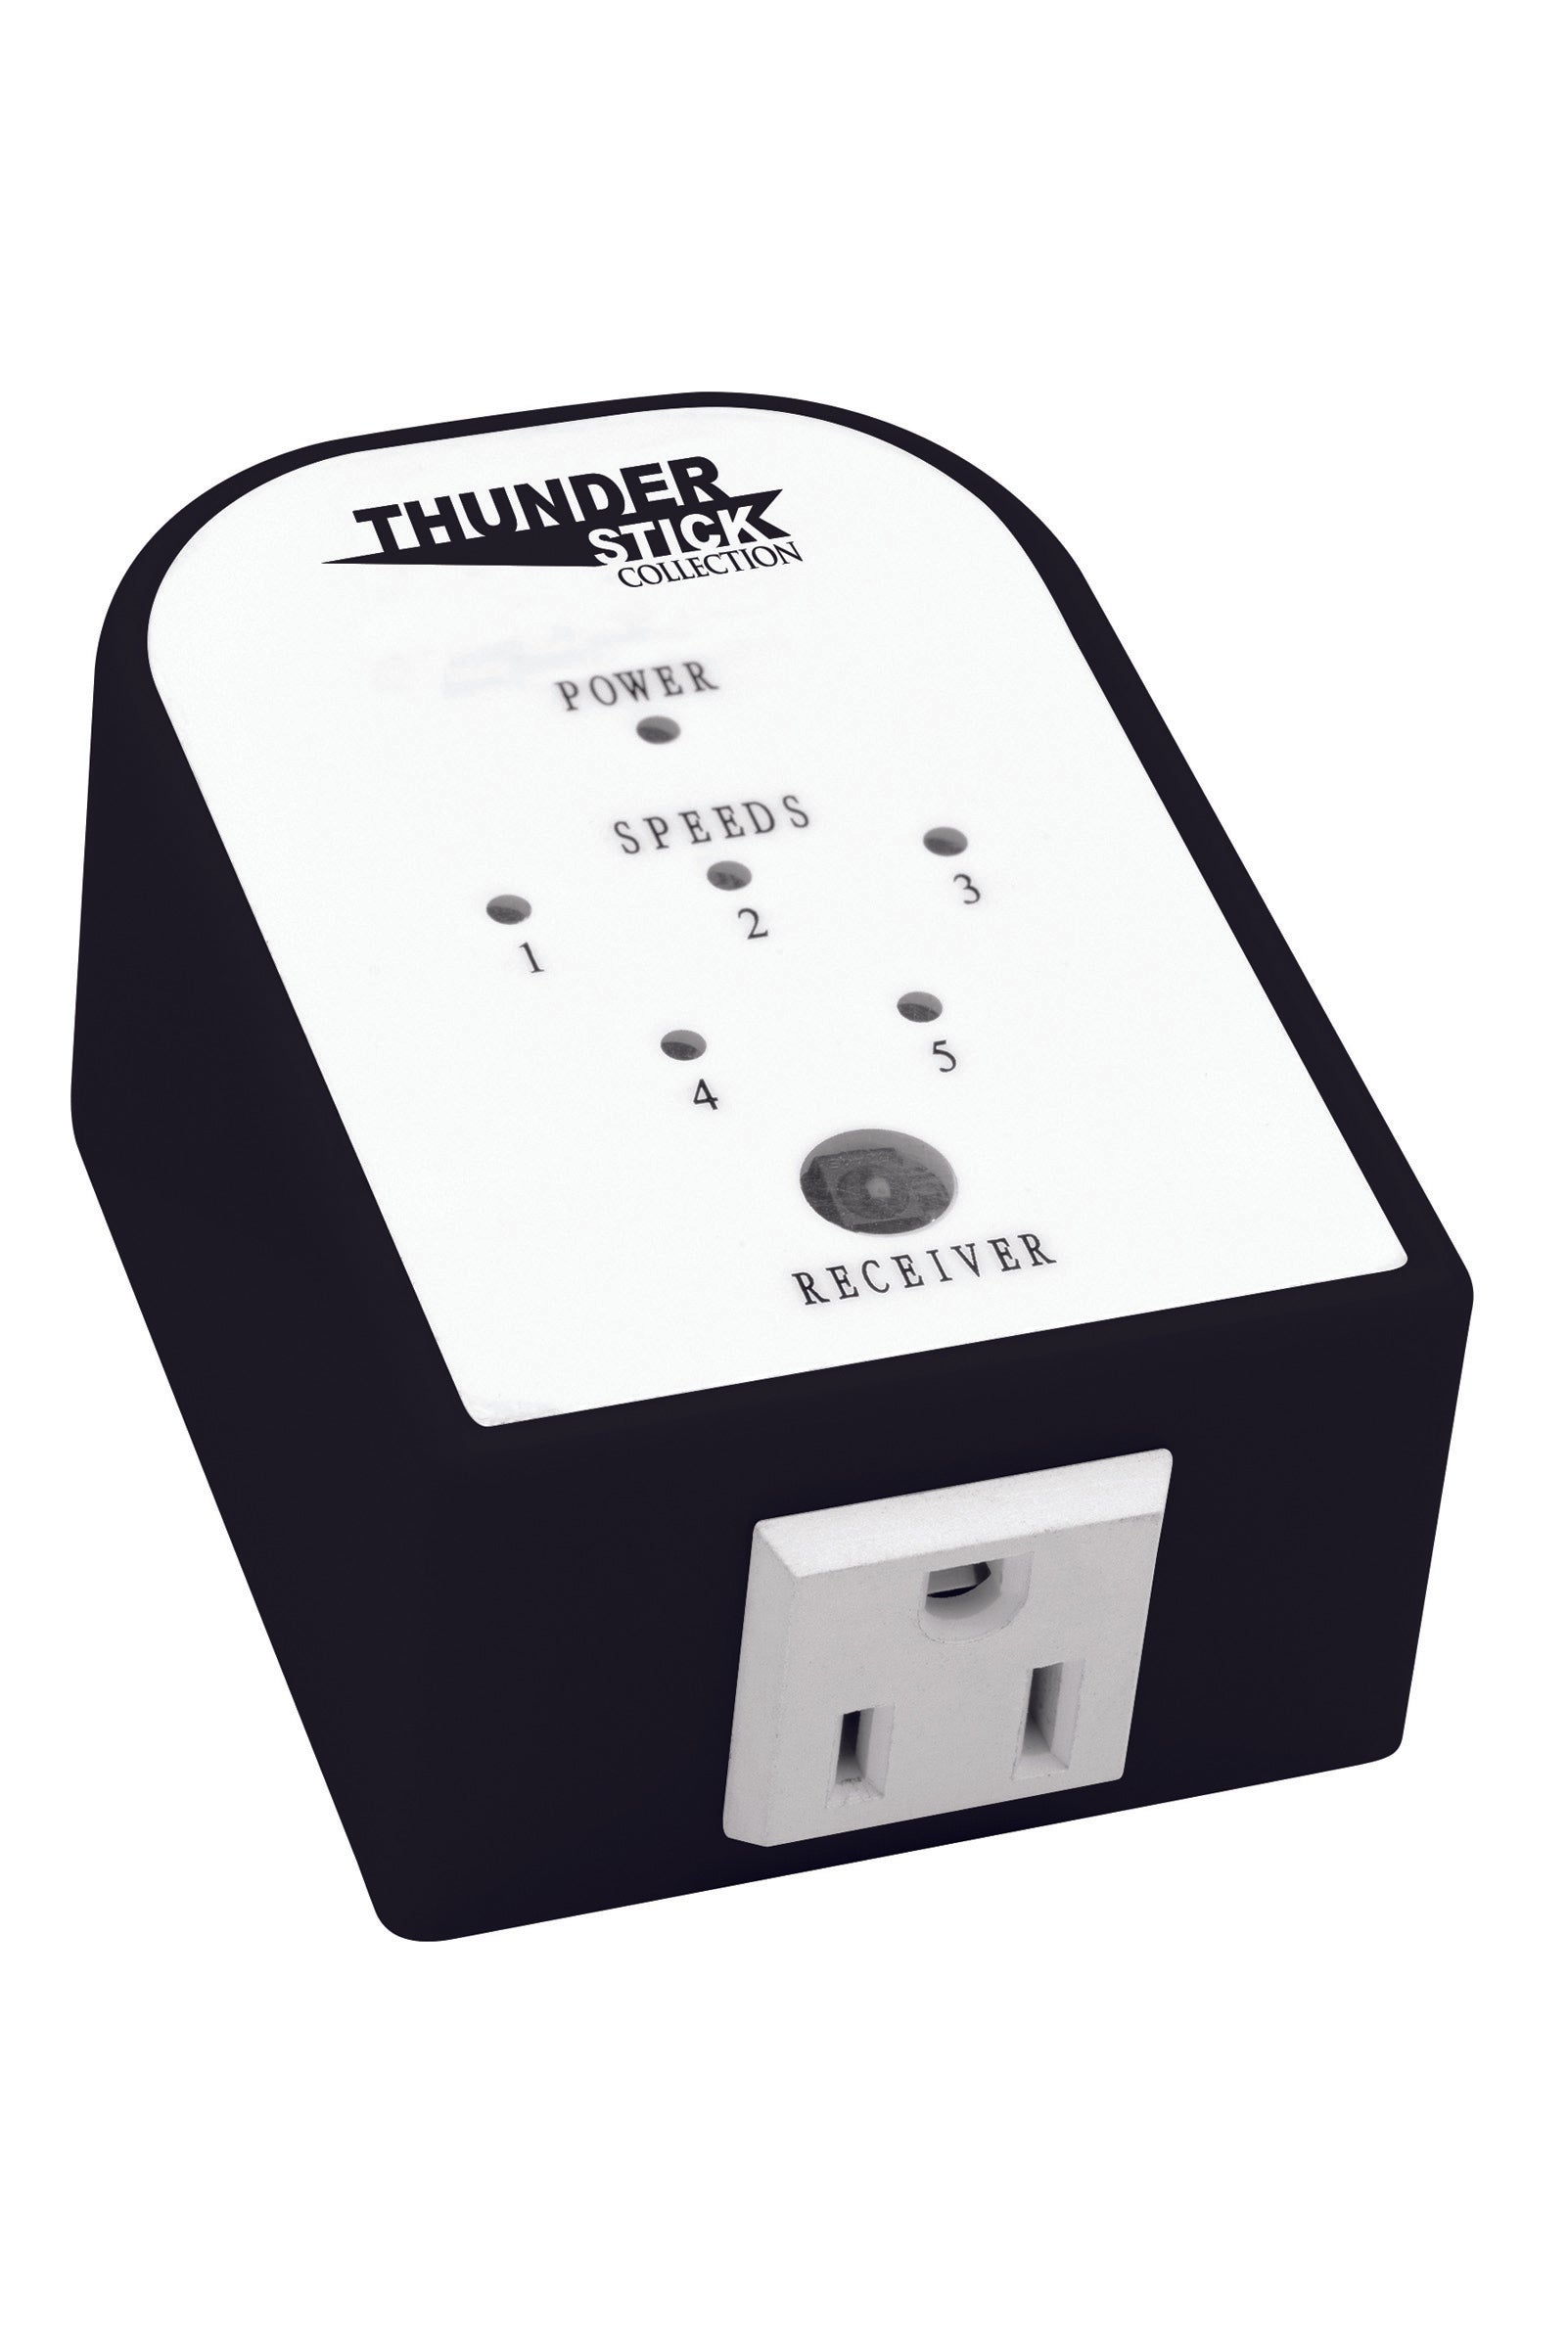 Thunder Touch 5 Speed Wireless Remote Wand Controller - UABDSM